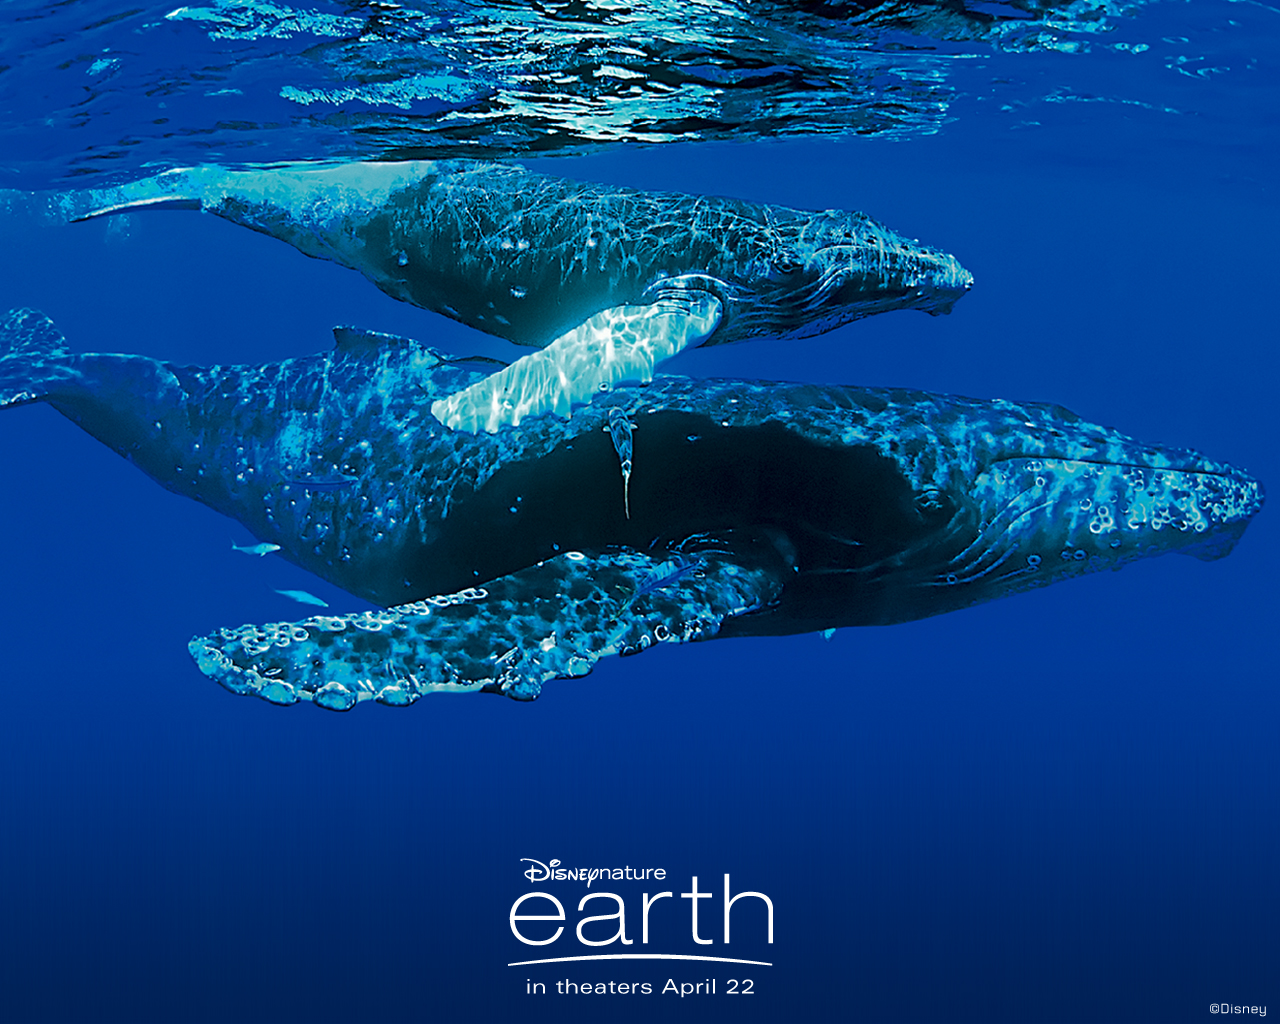 Download the Whale Earth Wallpaper, Whale Earth iPhone Wallpaper ...